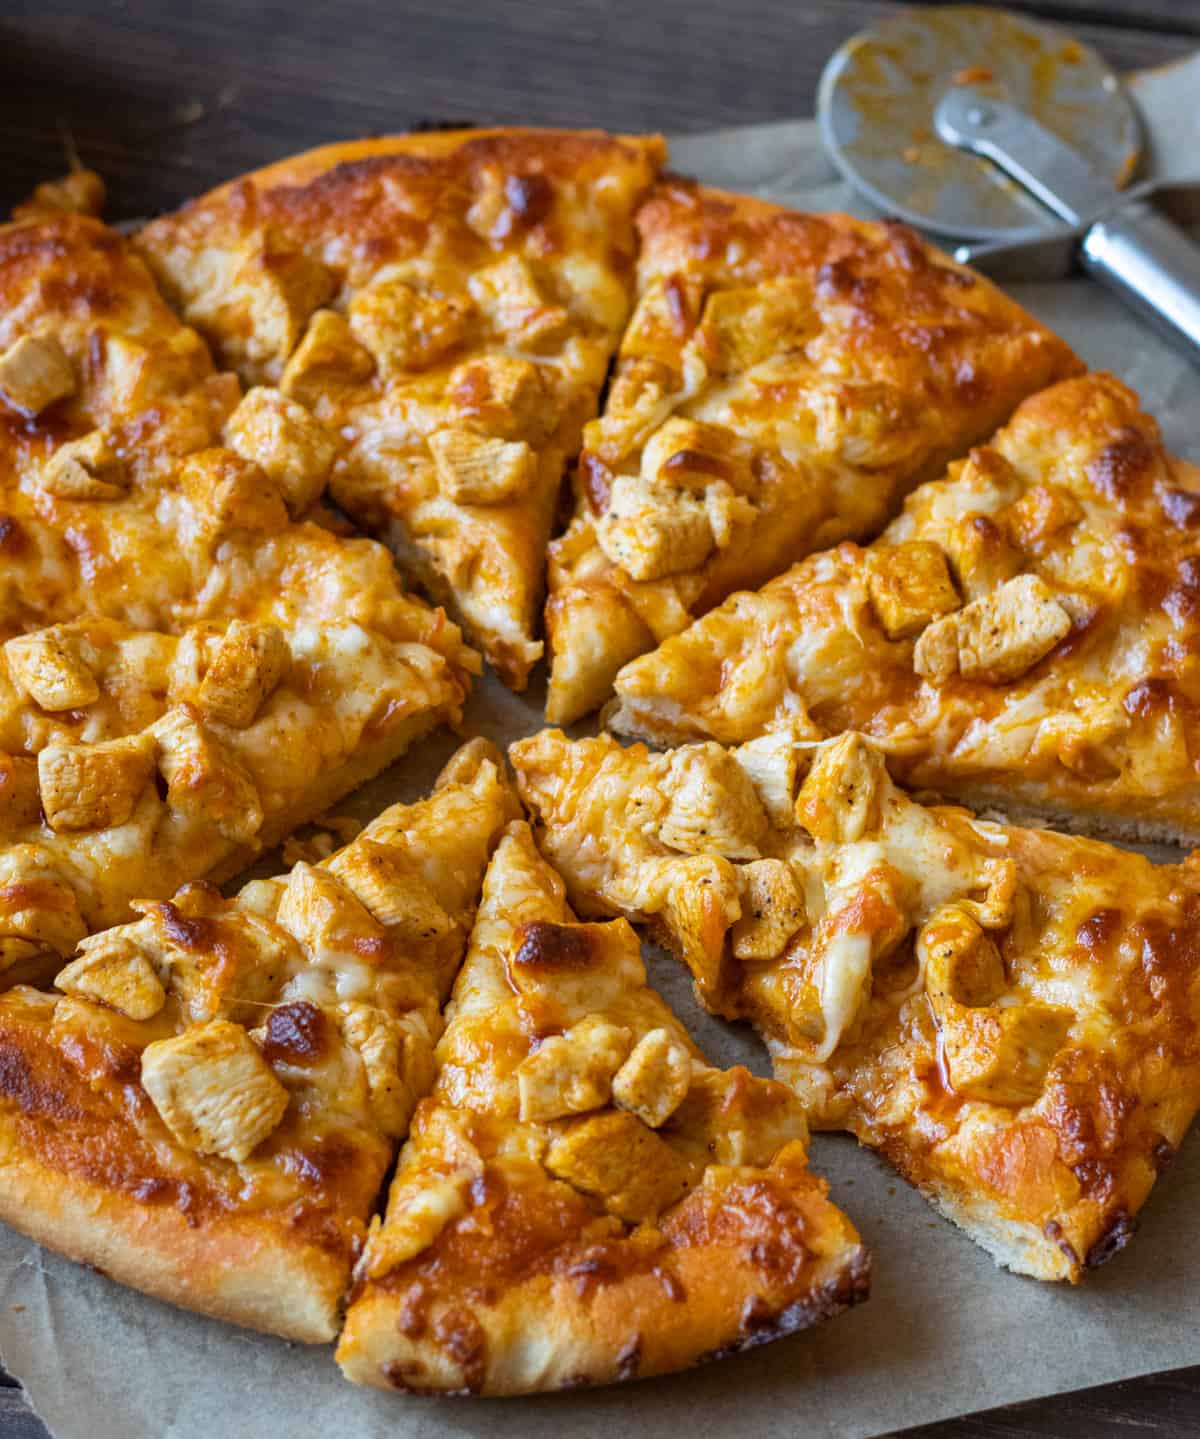 Buffalo Chicken Pizza cut into slices on parchment paper with a pizza cutter in the background.